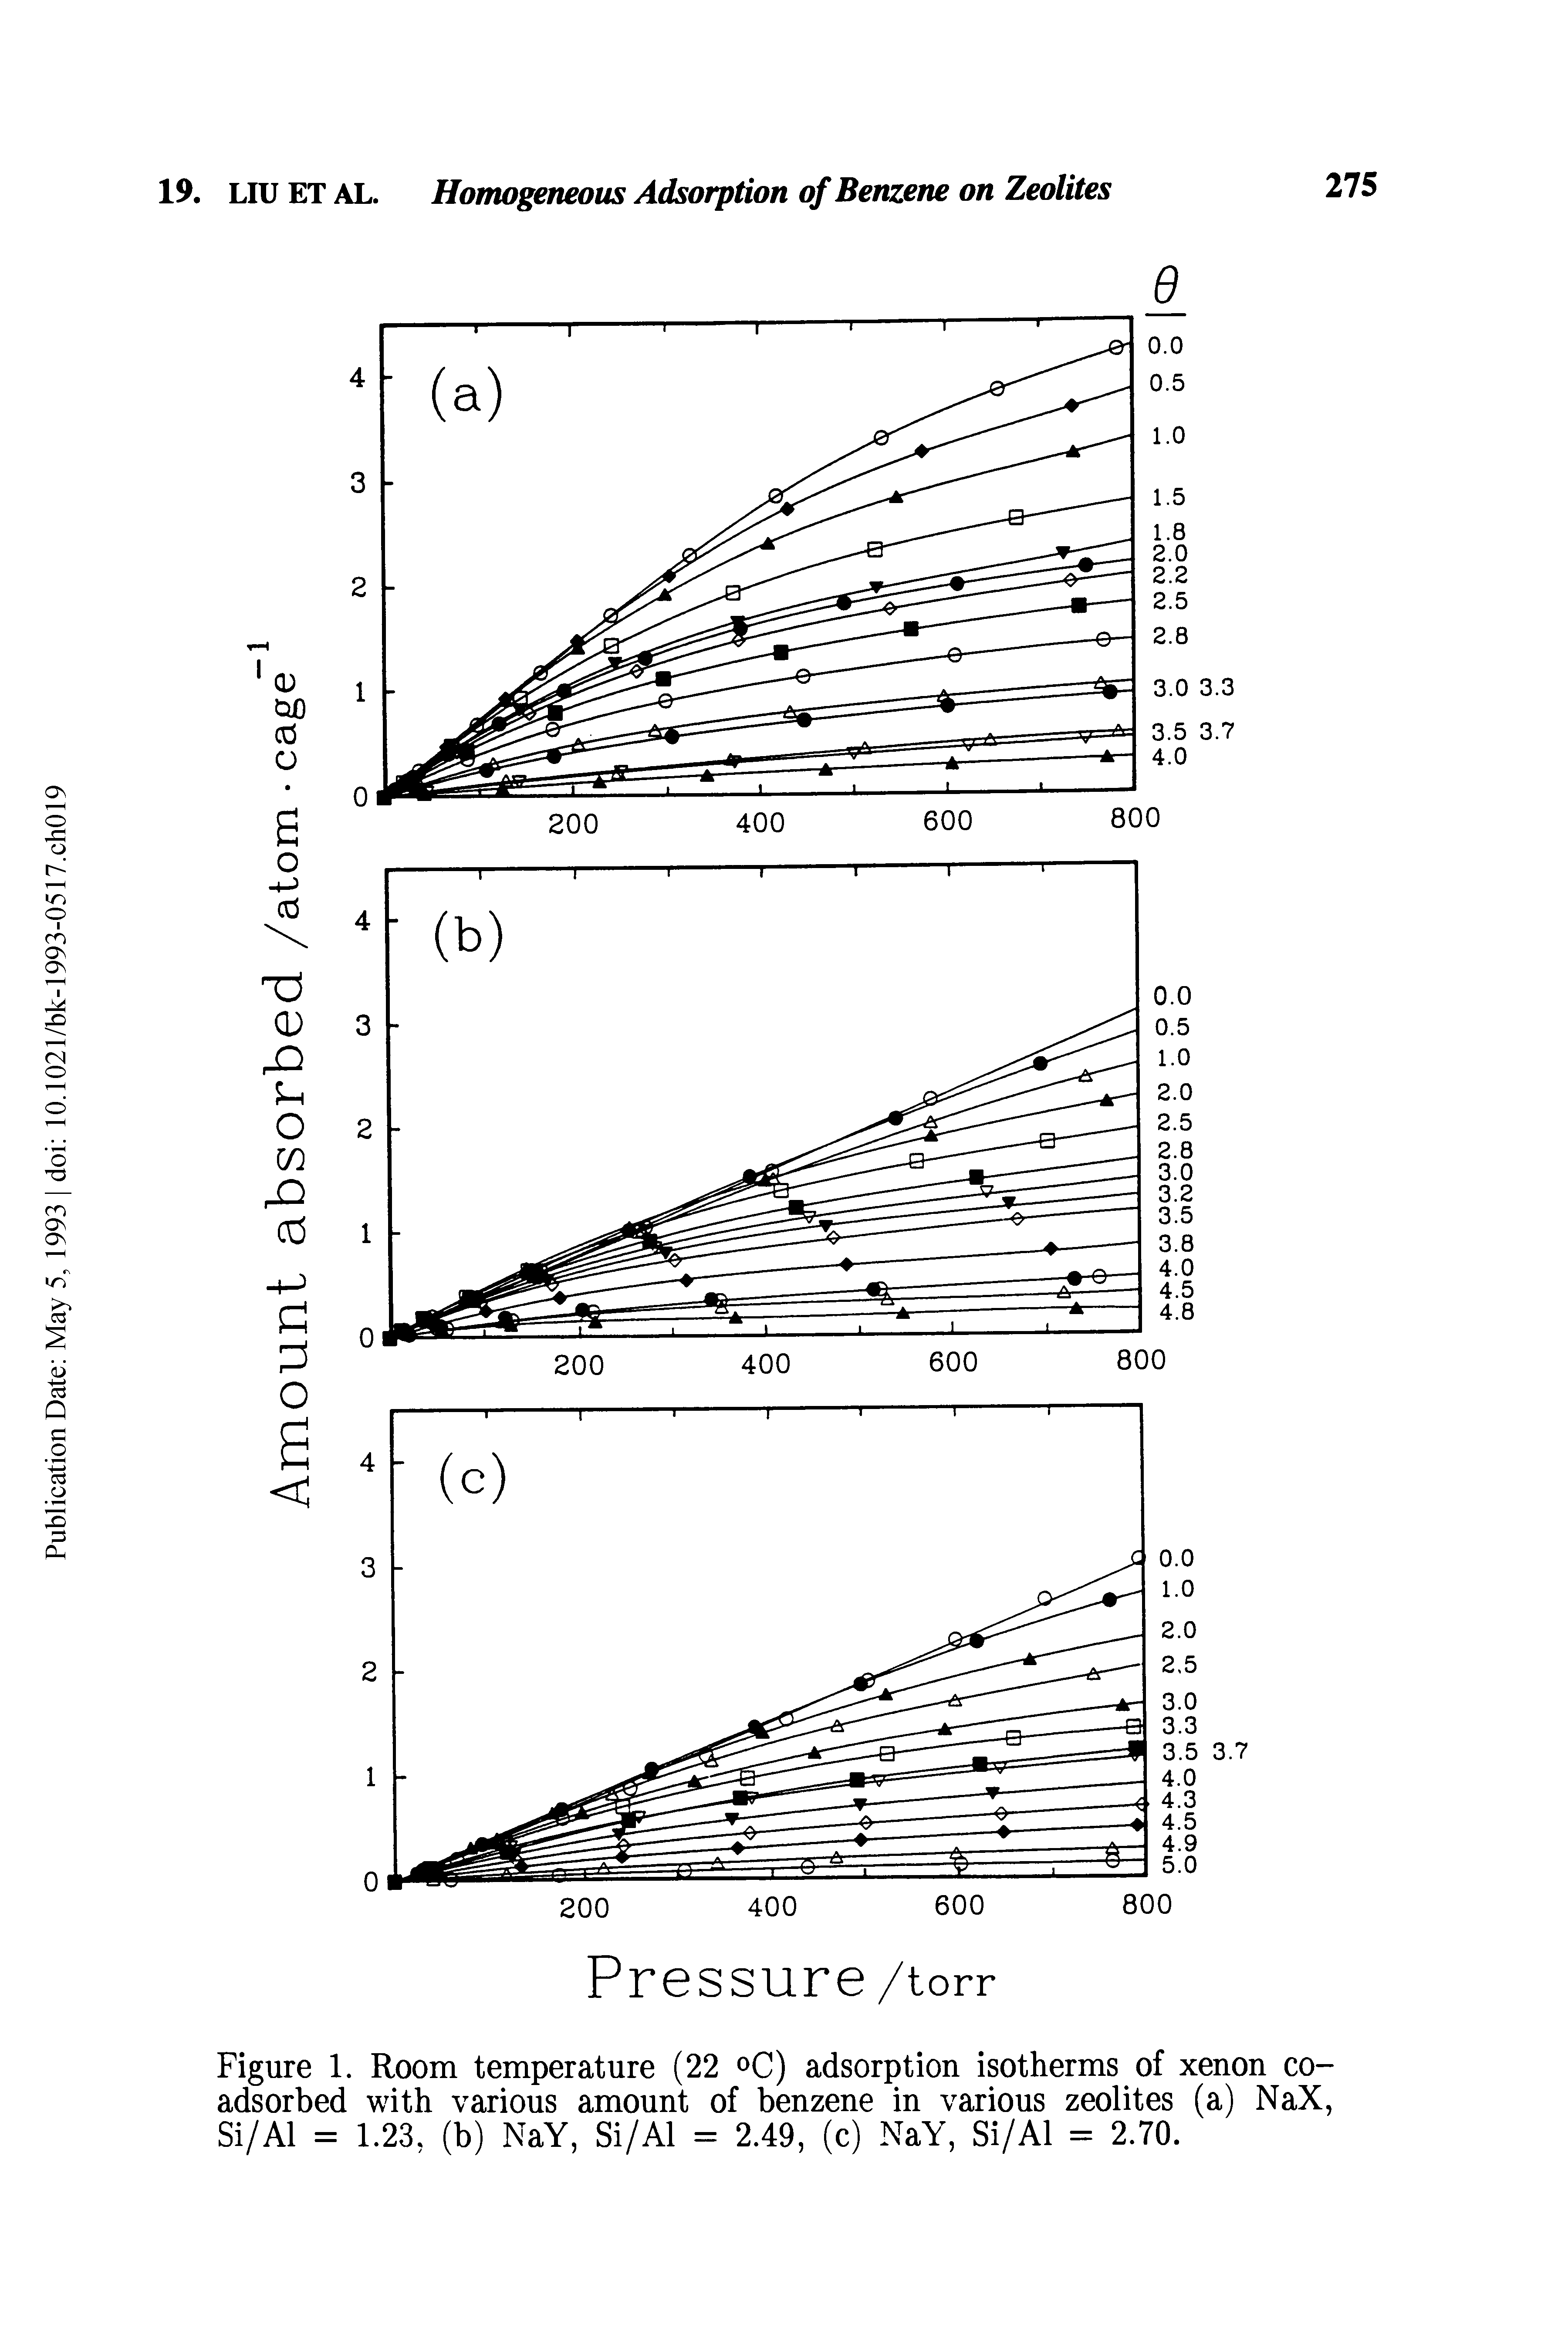 Figure 1. Room temperature (22 °C) adsorption isotherms of xenon coadsorbed with various amount of benzene in various zeolites (a) NaX, Si/Al = 1.23, (b) NaY, Si/Al = 2.49, (c) NaY, Si/Al = 2.70.